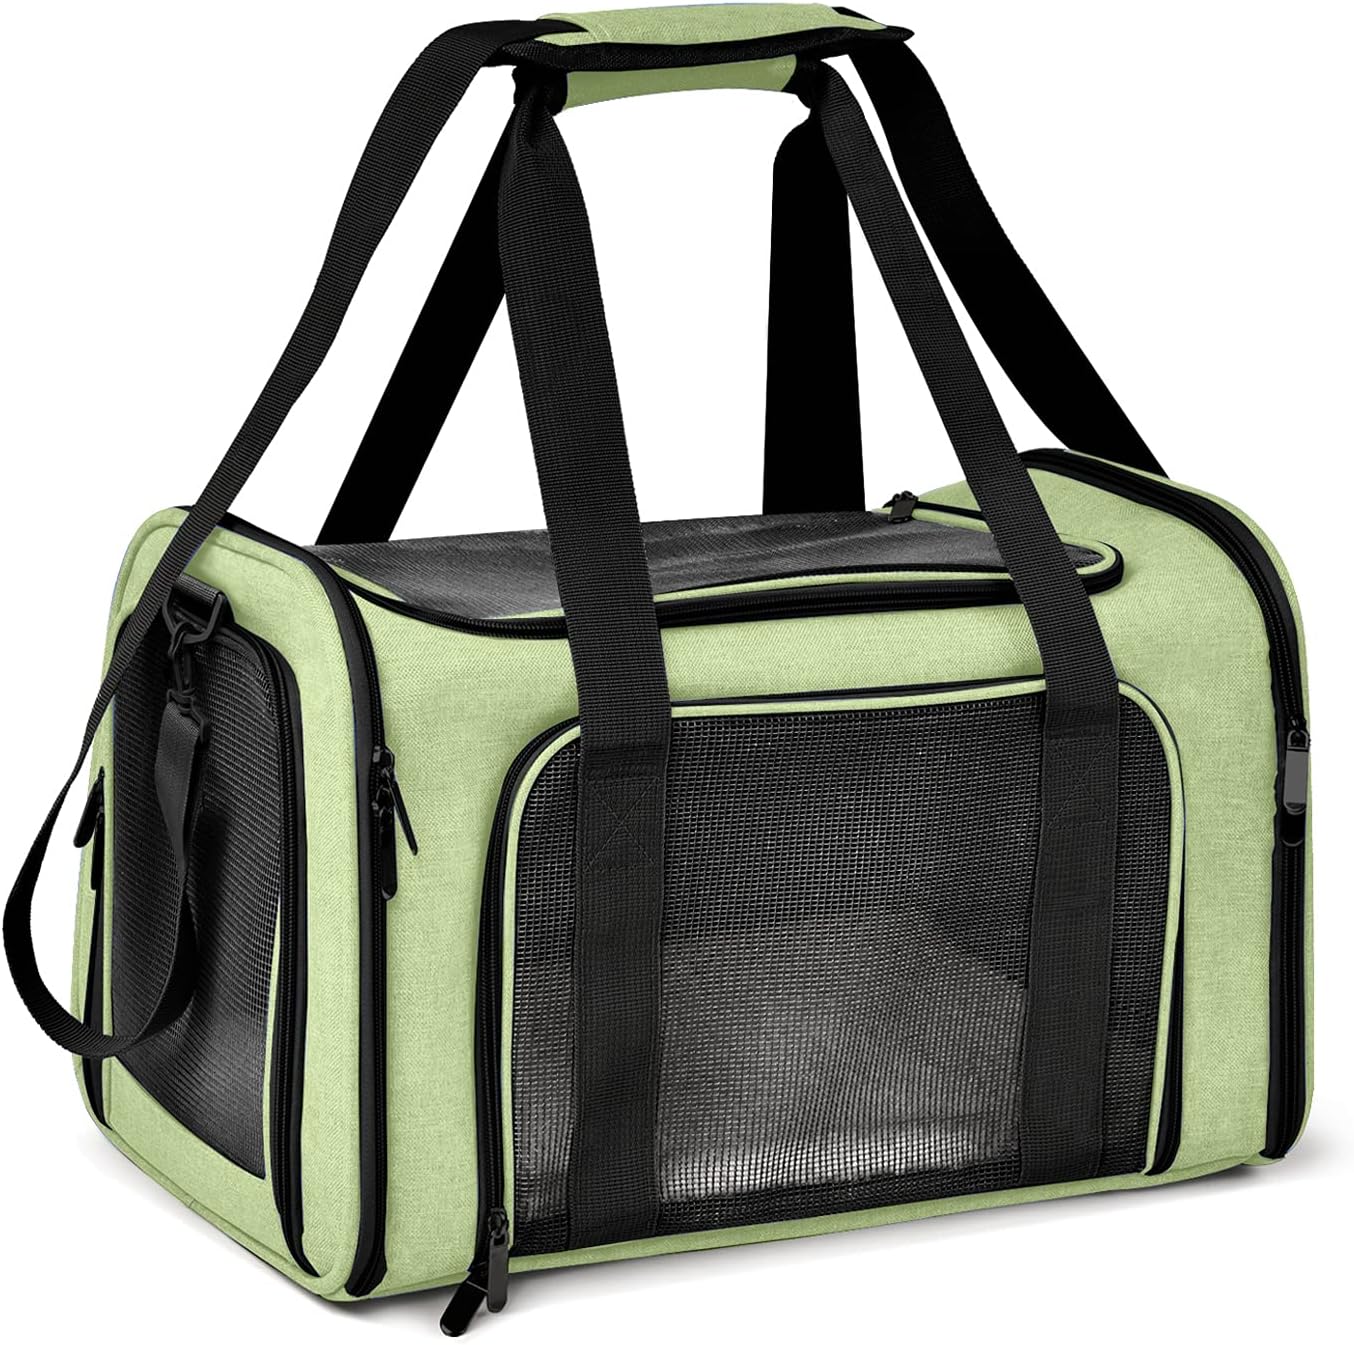 VEAGIA Cat Carrier,Pet Carrier,Cat Carriers for Medium Cats Under 25,Soft  Puppy Travel Bag Carriers for Small Dogs Airline Approved 17.5 x 10.5 x  10.5 inches ArmyGreen 01